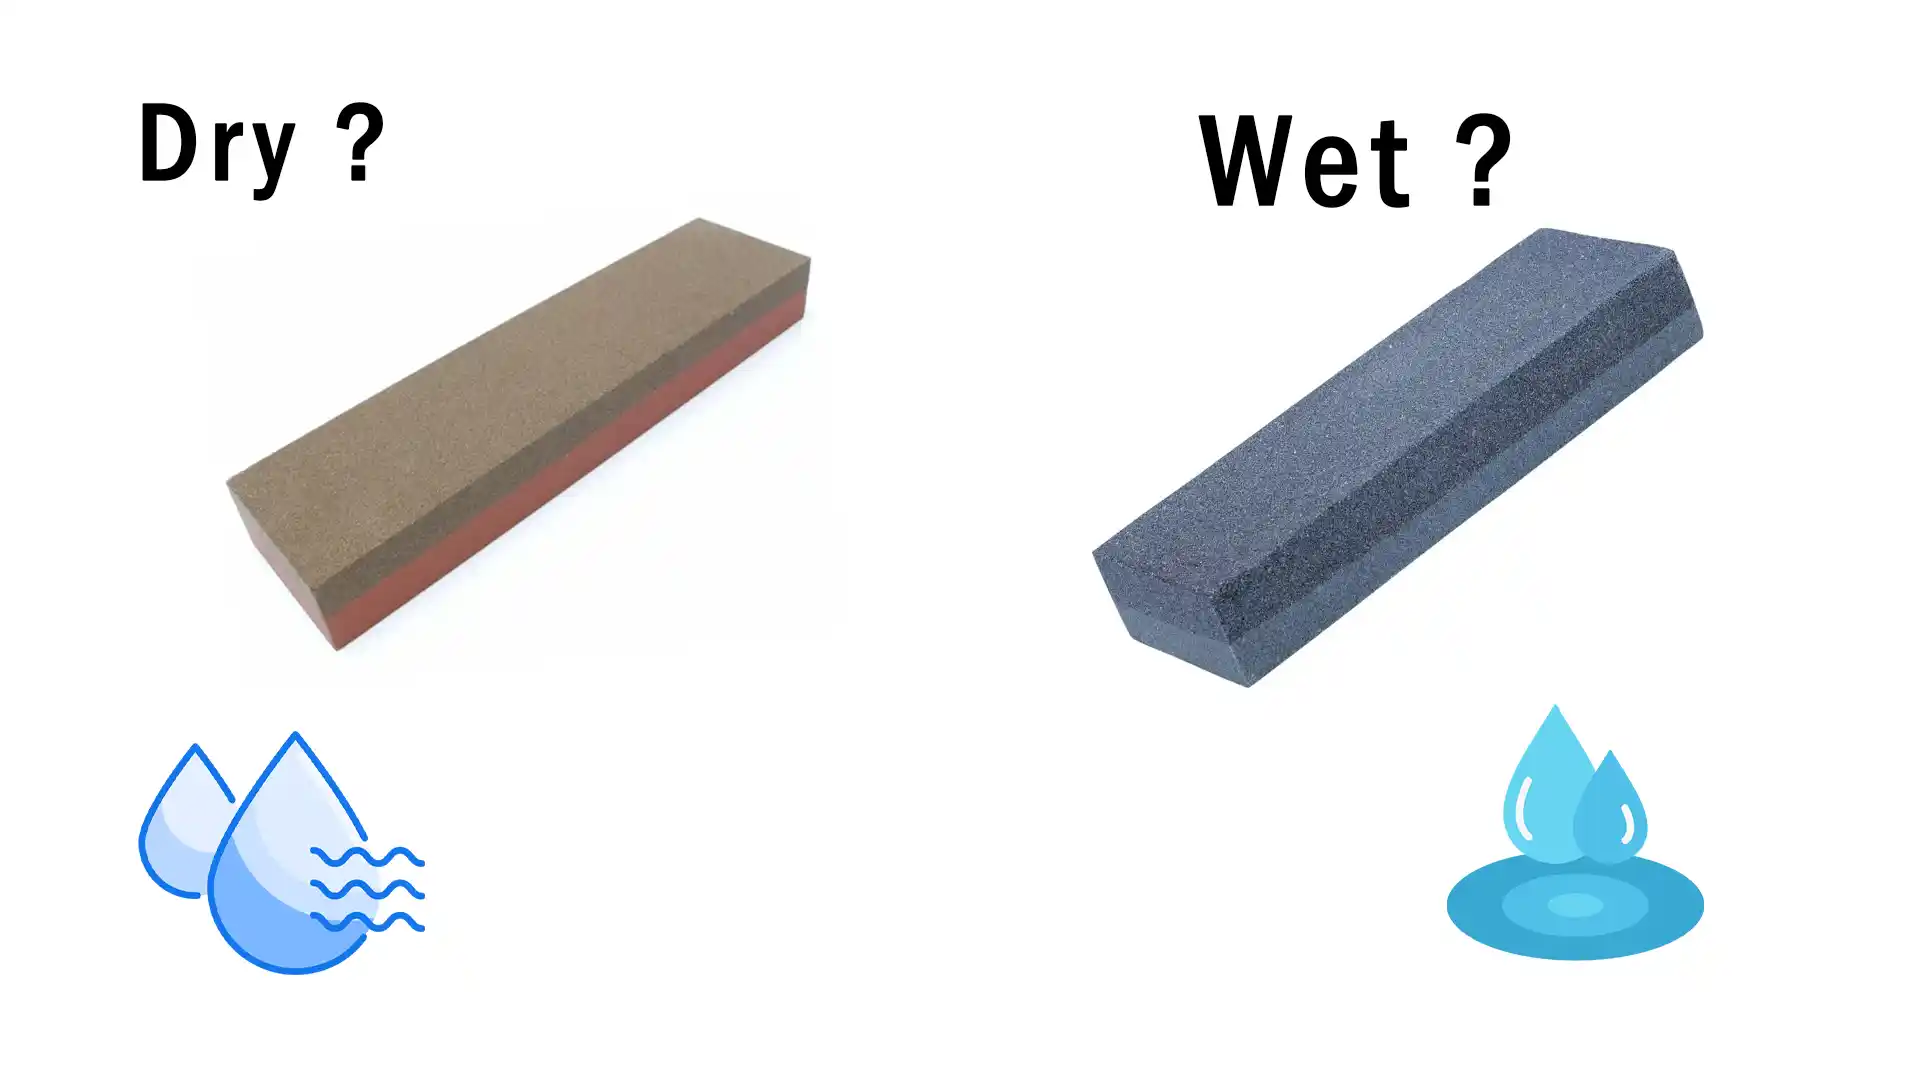 Use My Sharpening Stones Wet or Dry?